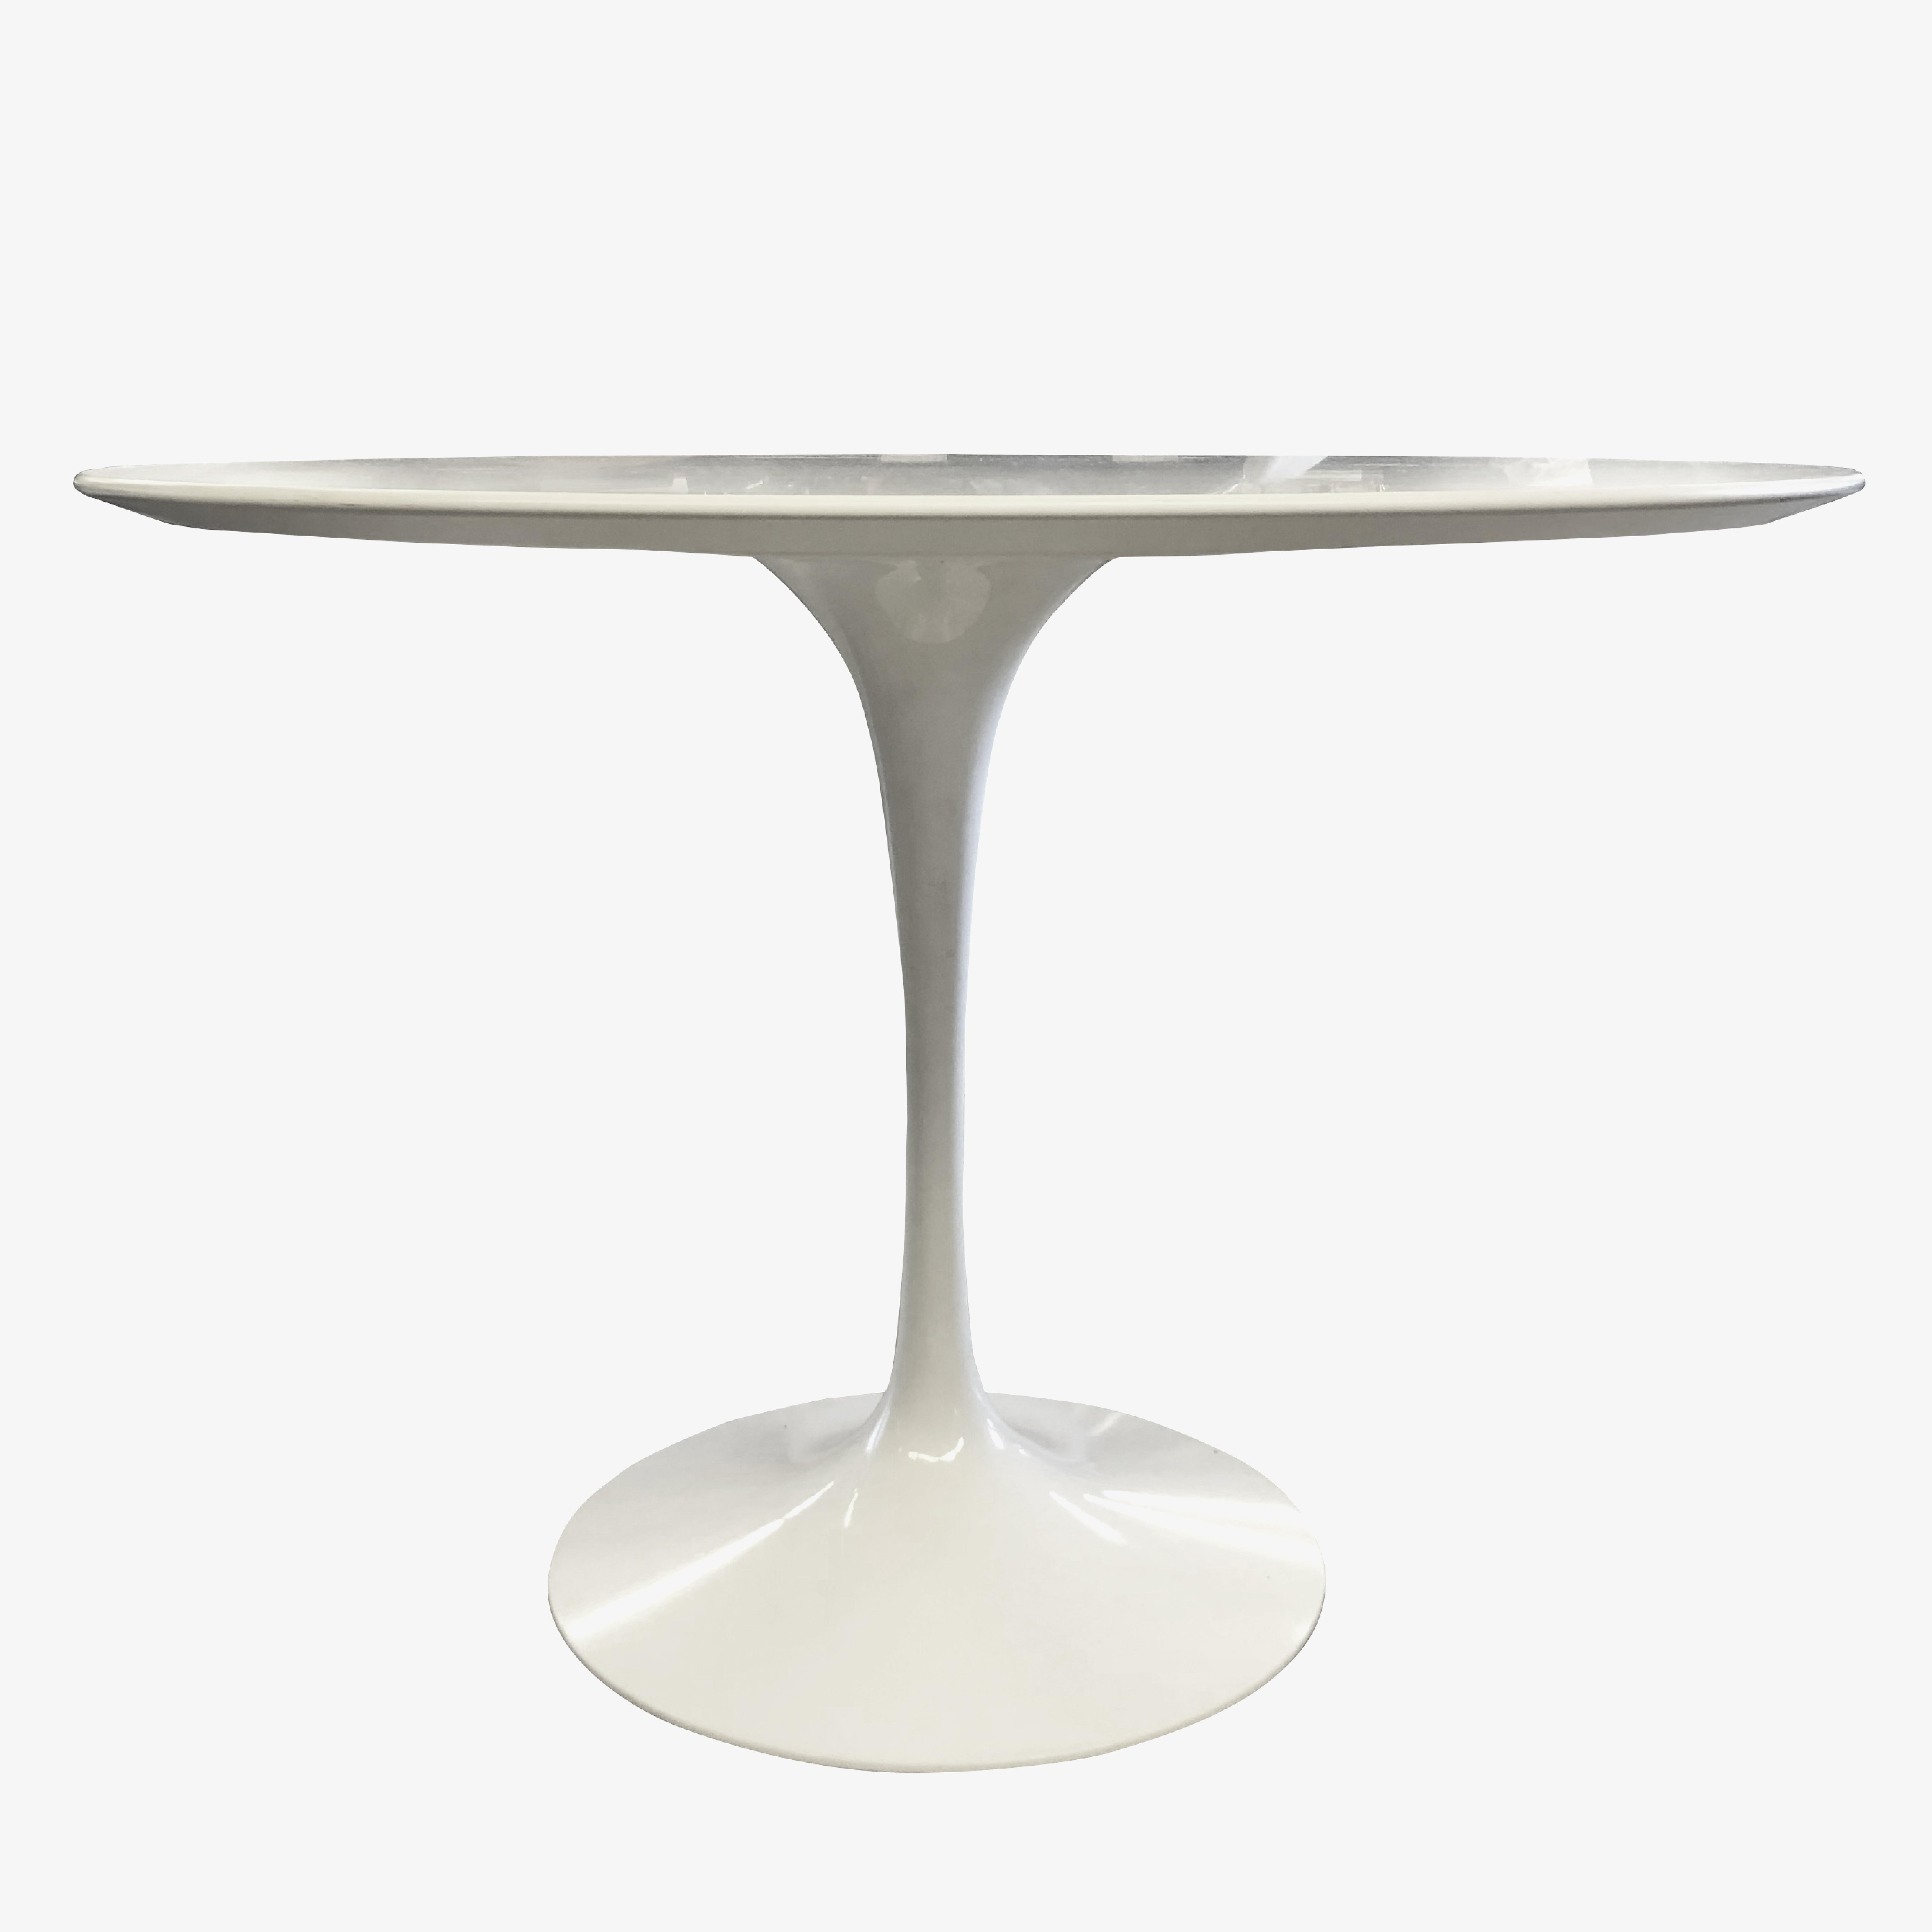 Classic Mid-Century Modern original, the round Saarinen Tulip pedestal table was designed by Eero Saarinen for Knoll Furniture in 1956. This iconic MCM dining table measures at 42